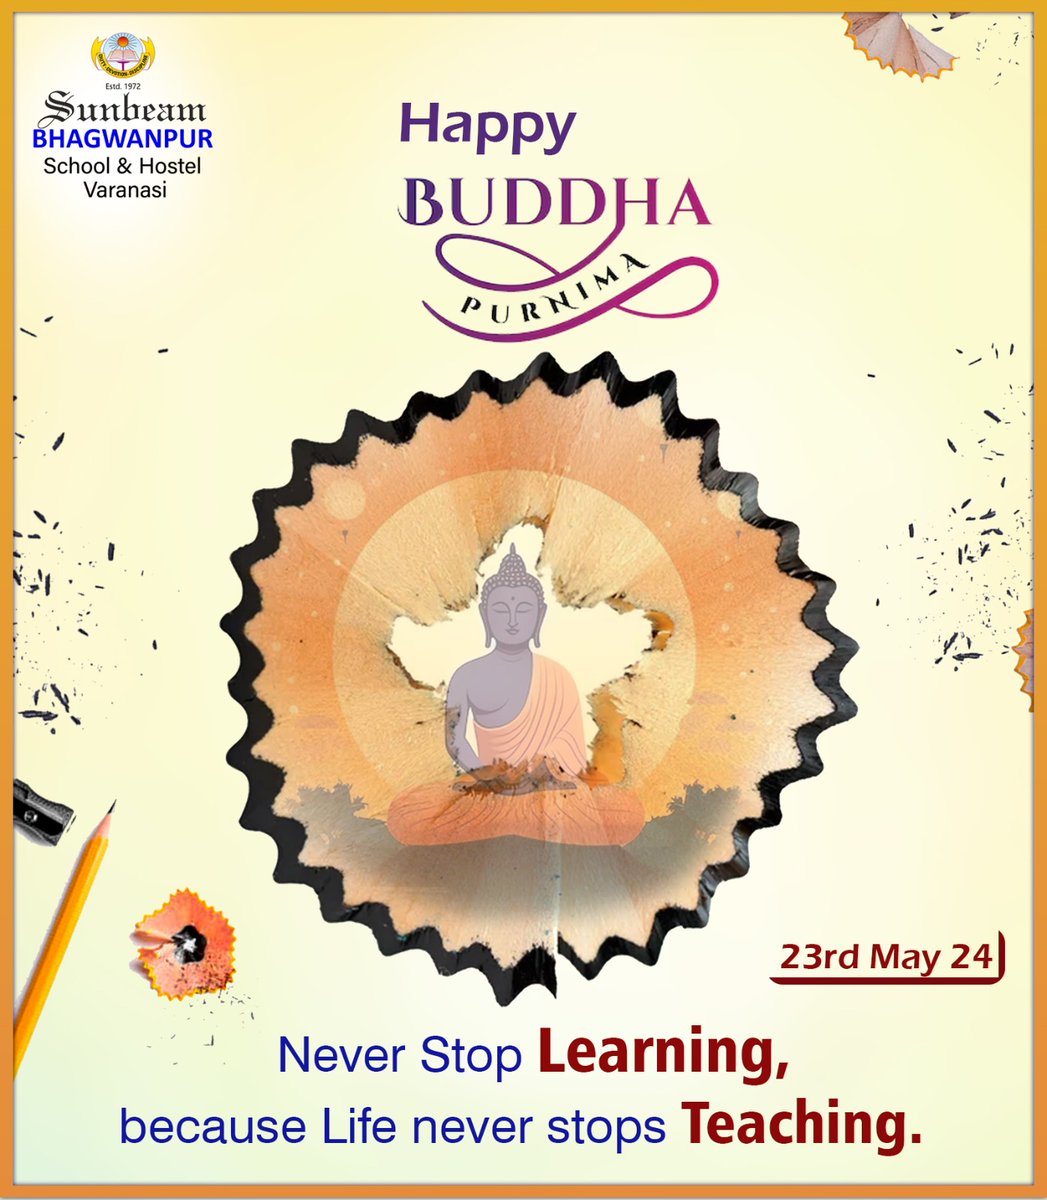 🌼 Happy Buddha Purnima! 🌼

May the teachings of Lord Buddha inspire our students to walk the path of wisdom, compassion, and peace. Let's embrace kindness and strive for inner growth.

#BuddhaPurnima  #PeaceAndCompassion 
#no1cbseschoolinvaranasi 
#sunbeambhagwanpur